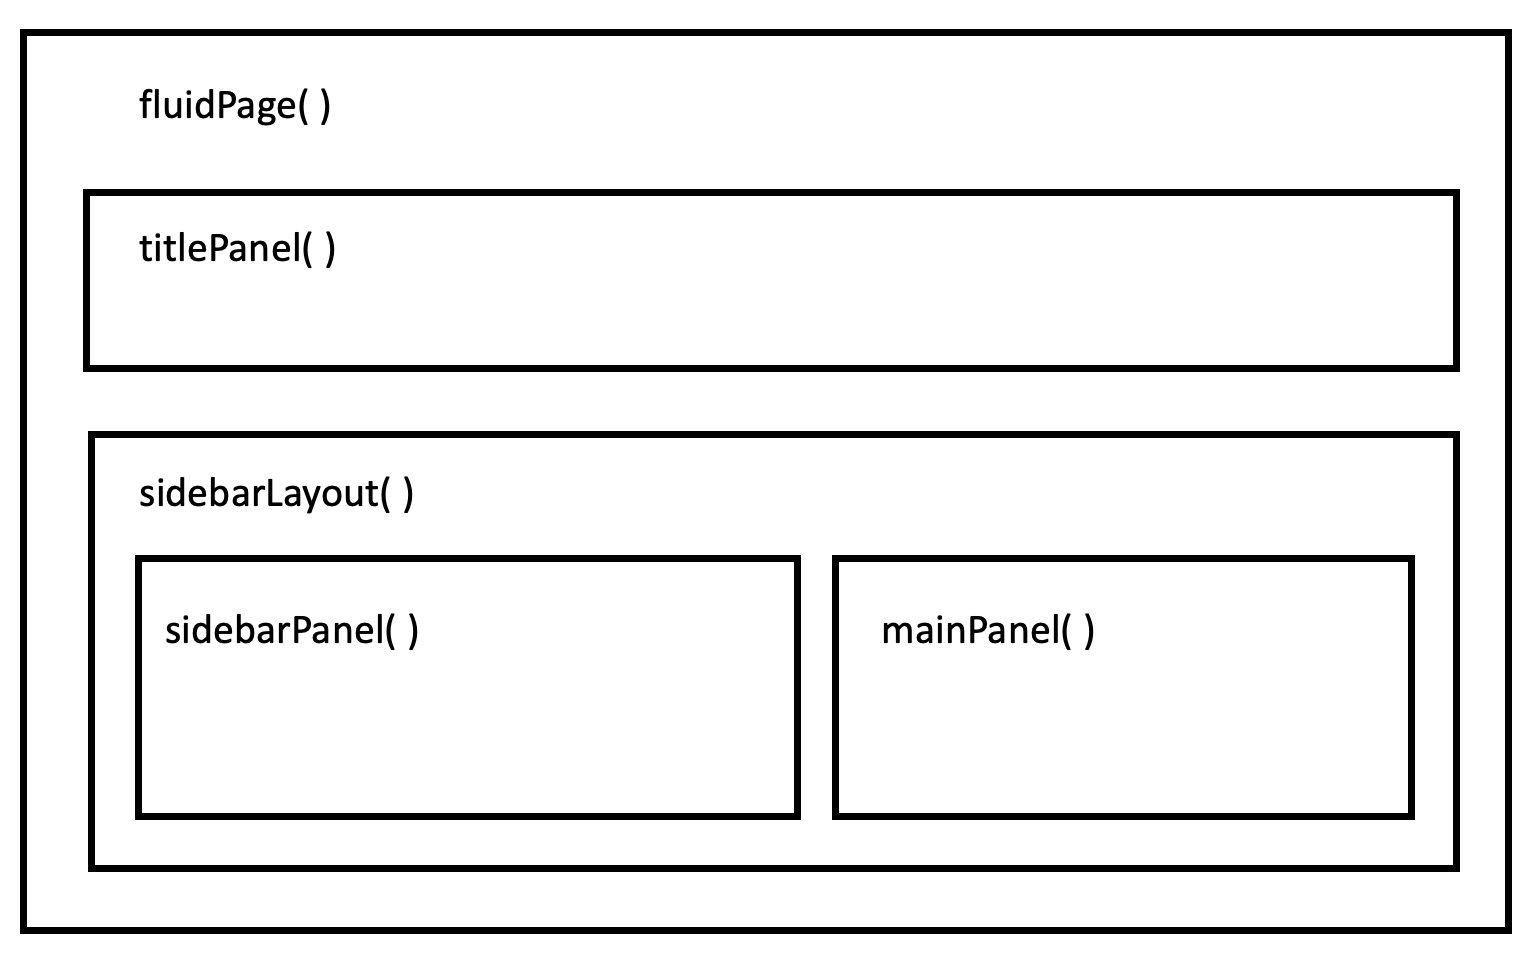 Figure 3. Wireframe diagram displaying the structure of the sidebar layout.